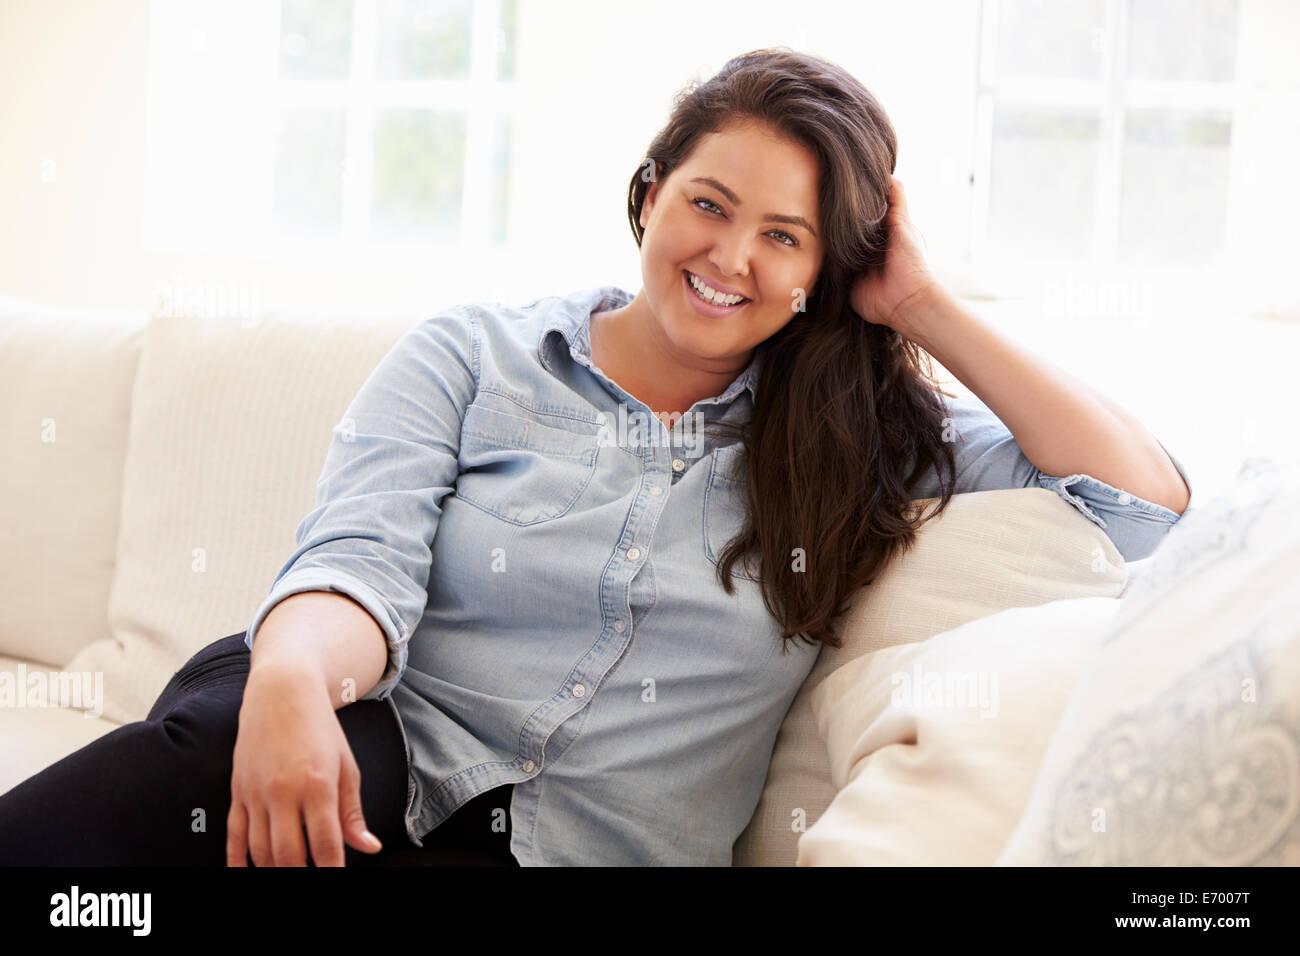 Portrait Of Overweight Woman Sitting On Sofa Stock Photo